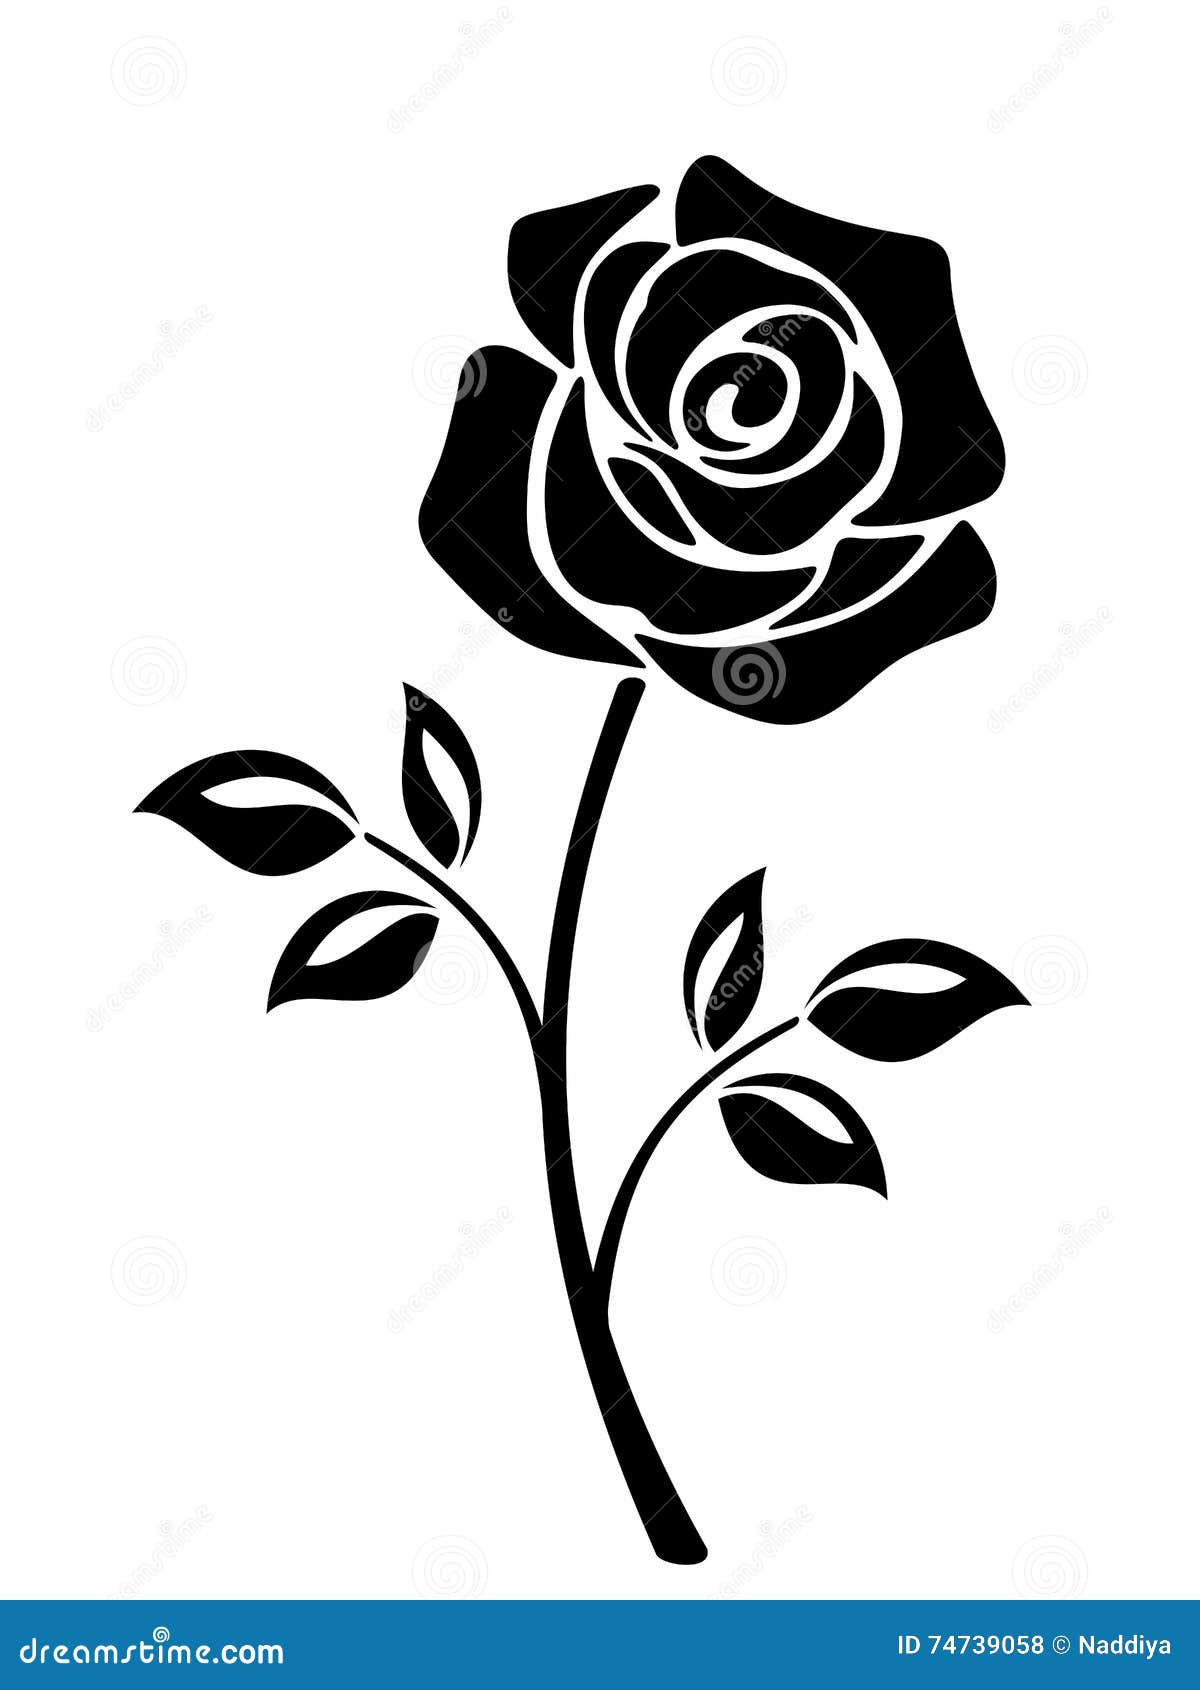 black silhouette of a rose flower.  s.